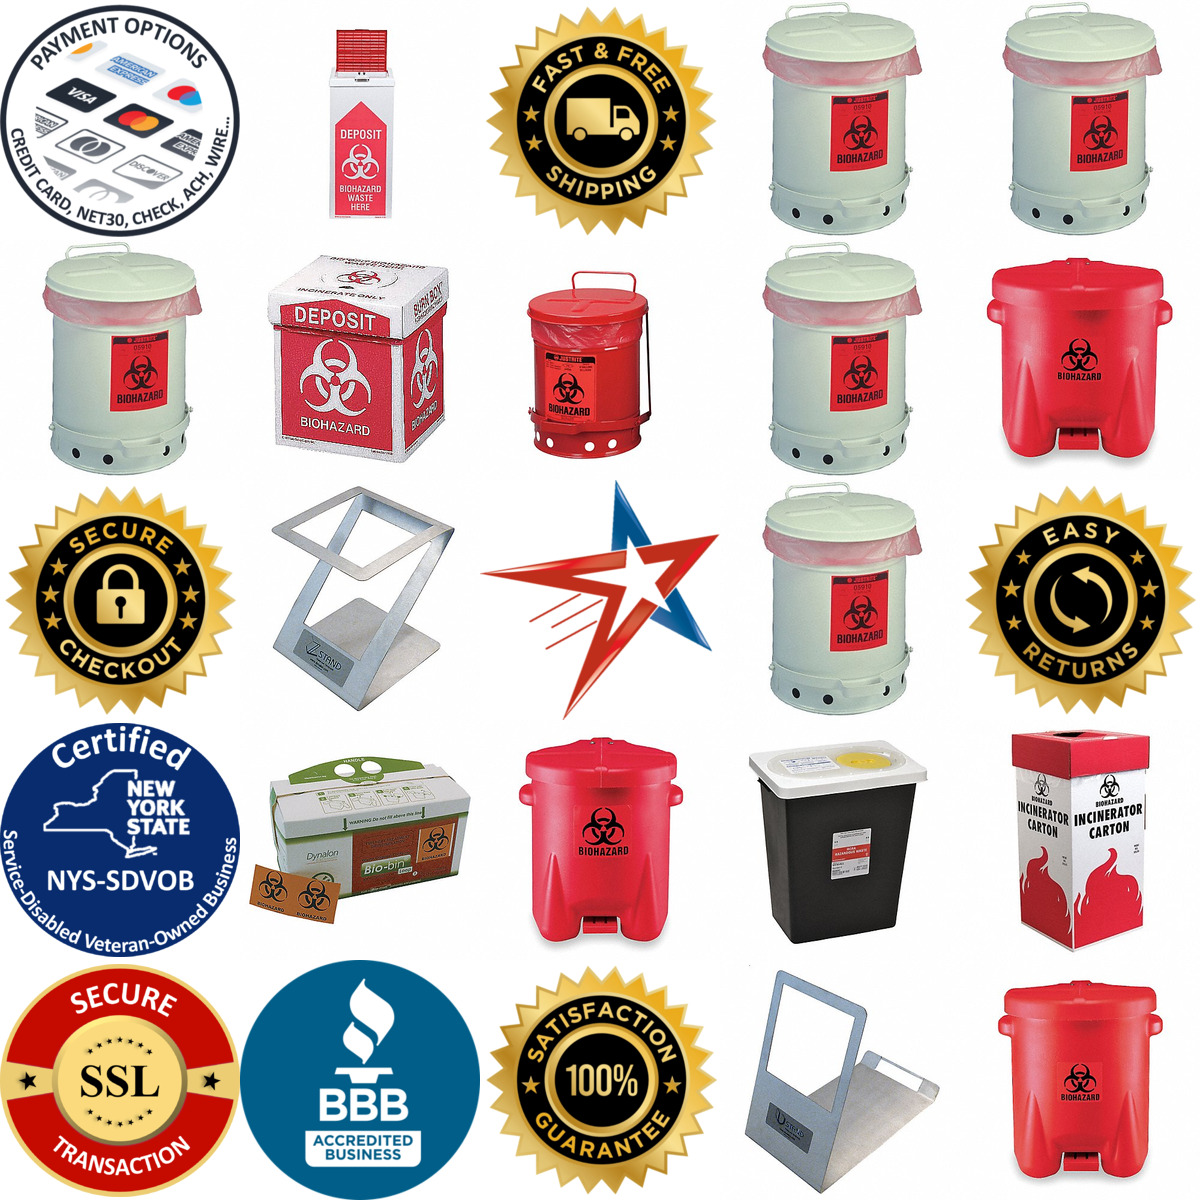 A selection of Biohazard Waste Cans products on GoVets